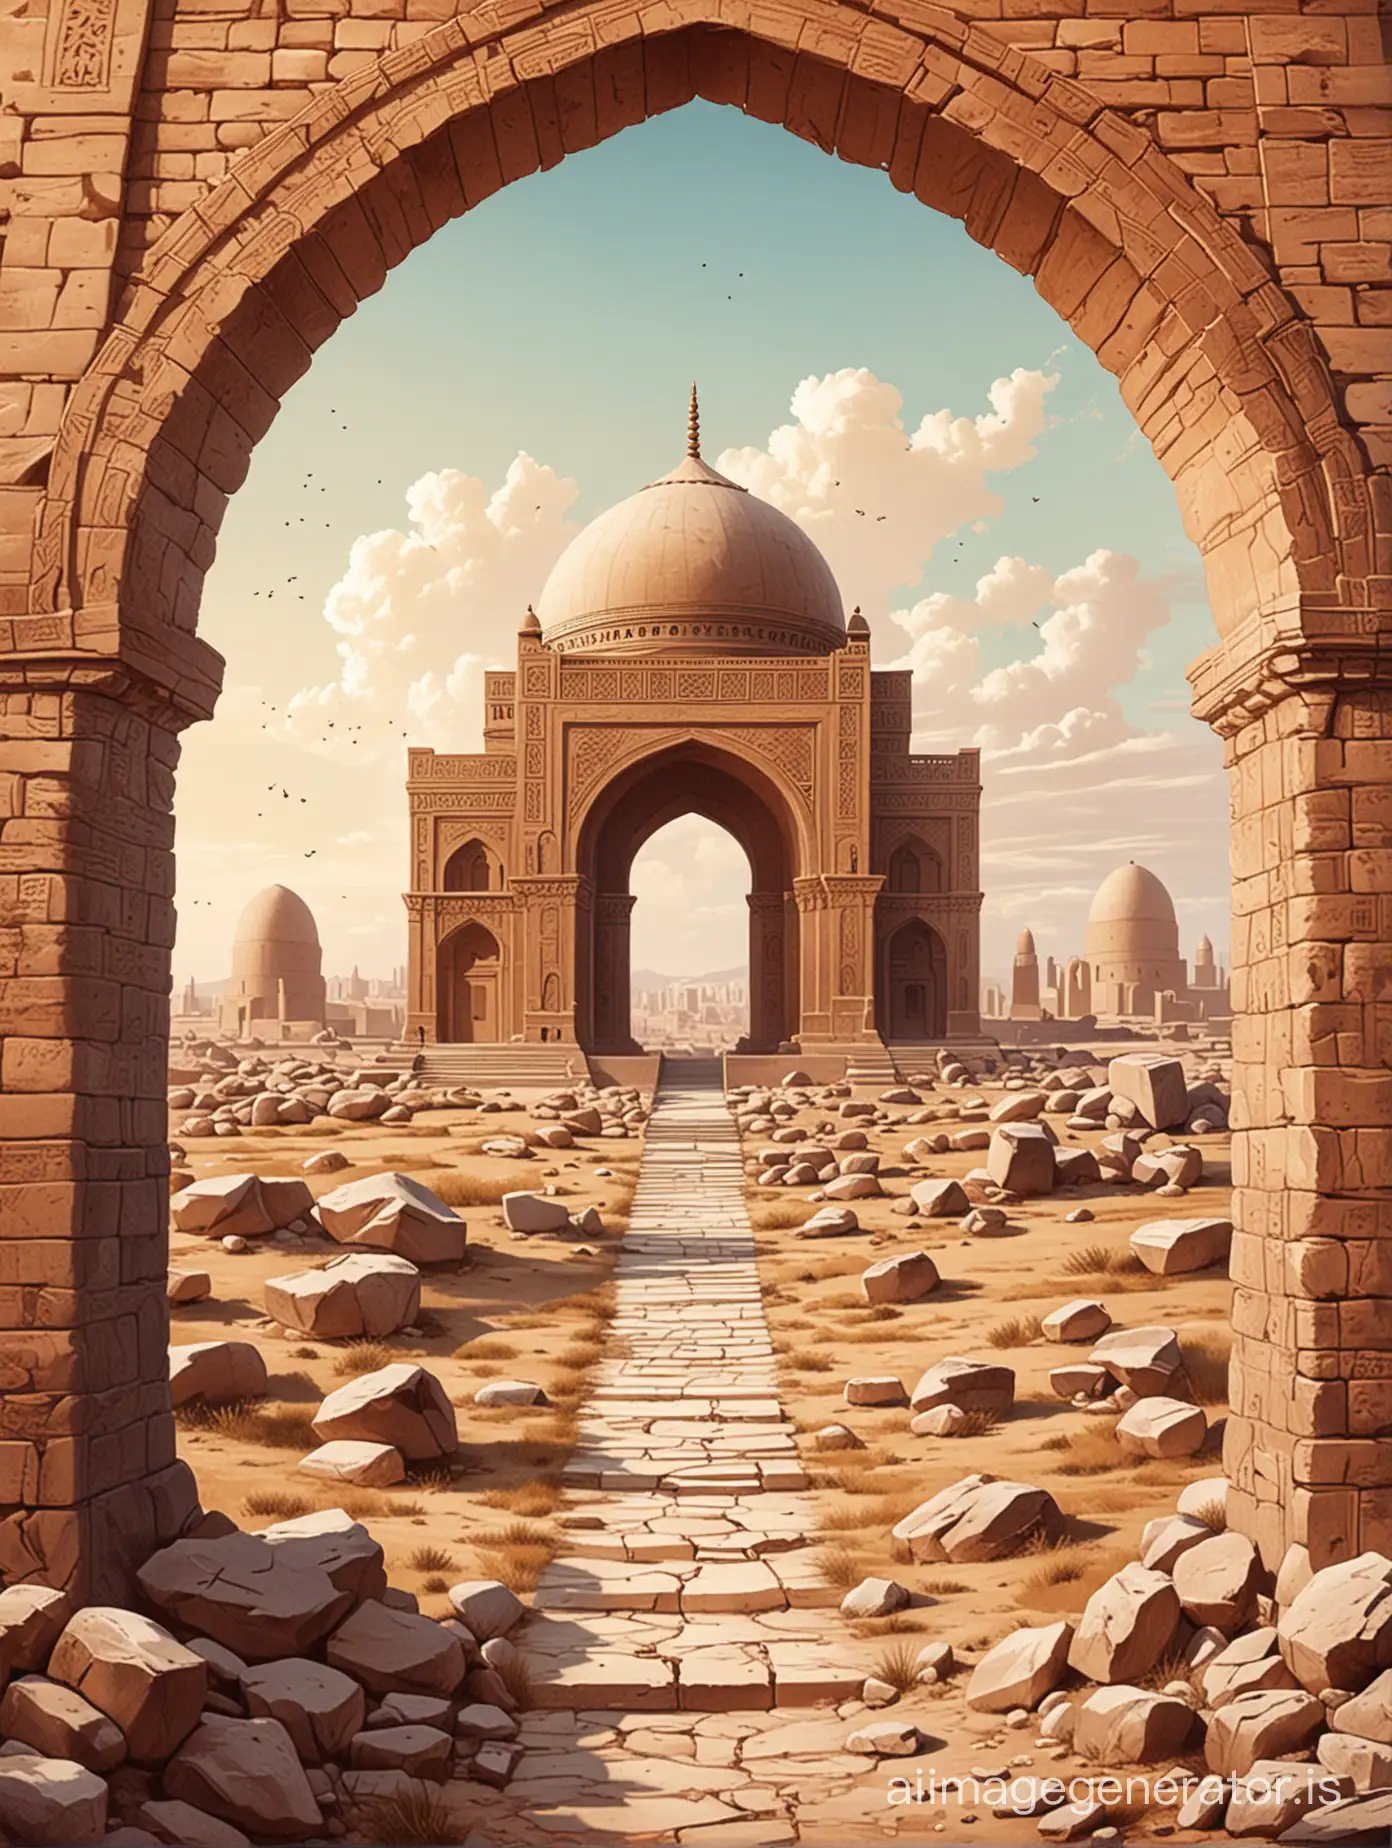 Illustration for a book cover.  Eastern historical monument for background